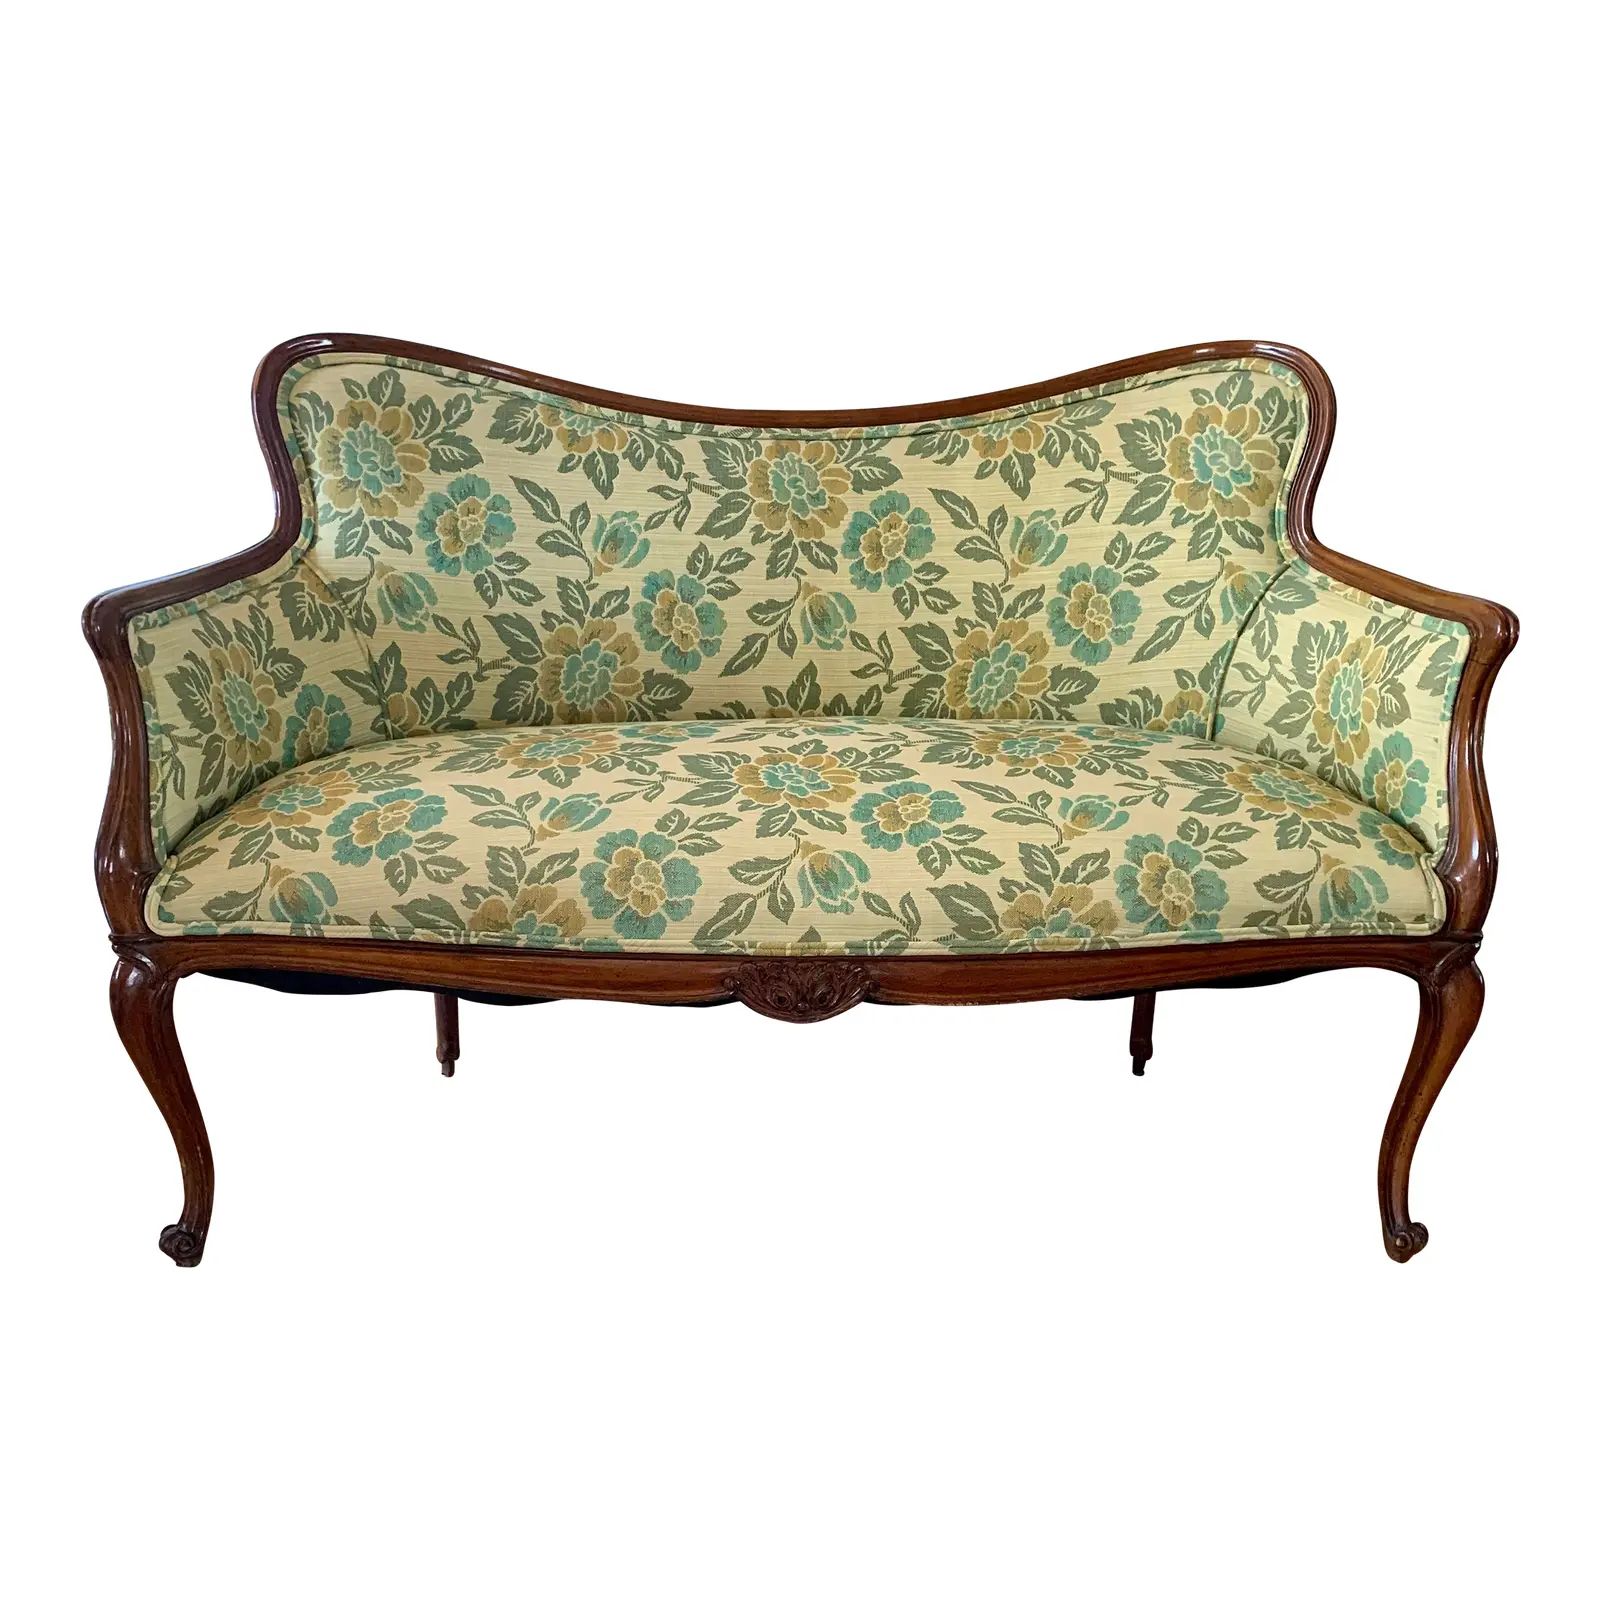 Antique Carved Fruitwood Settee | Chairish